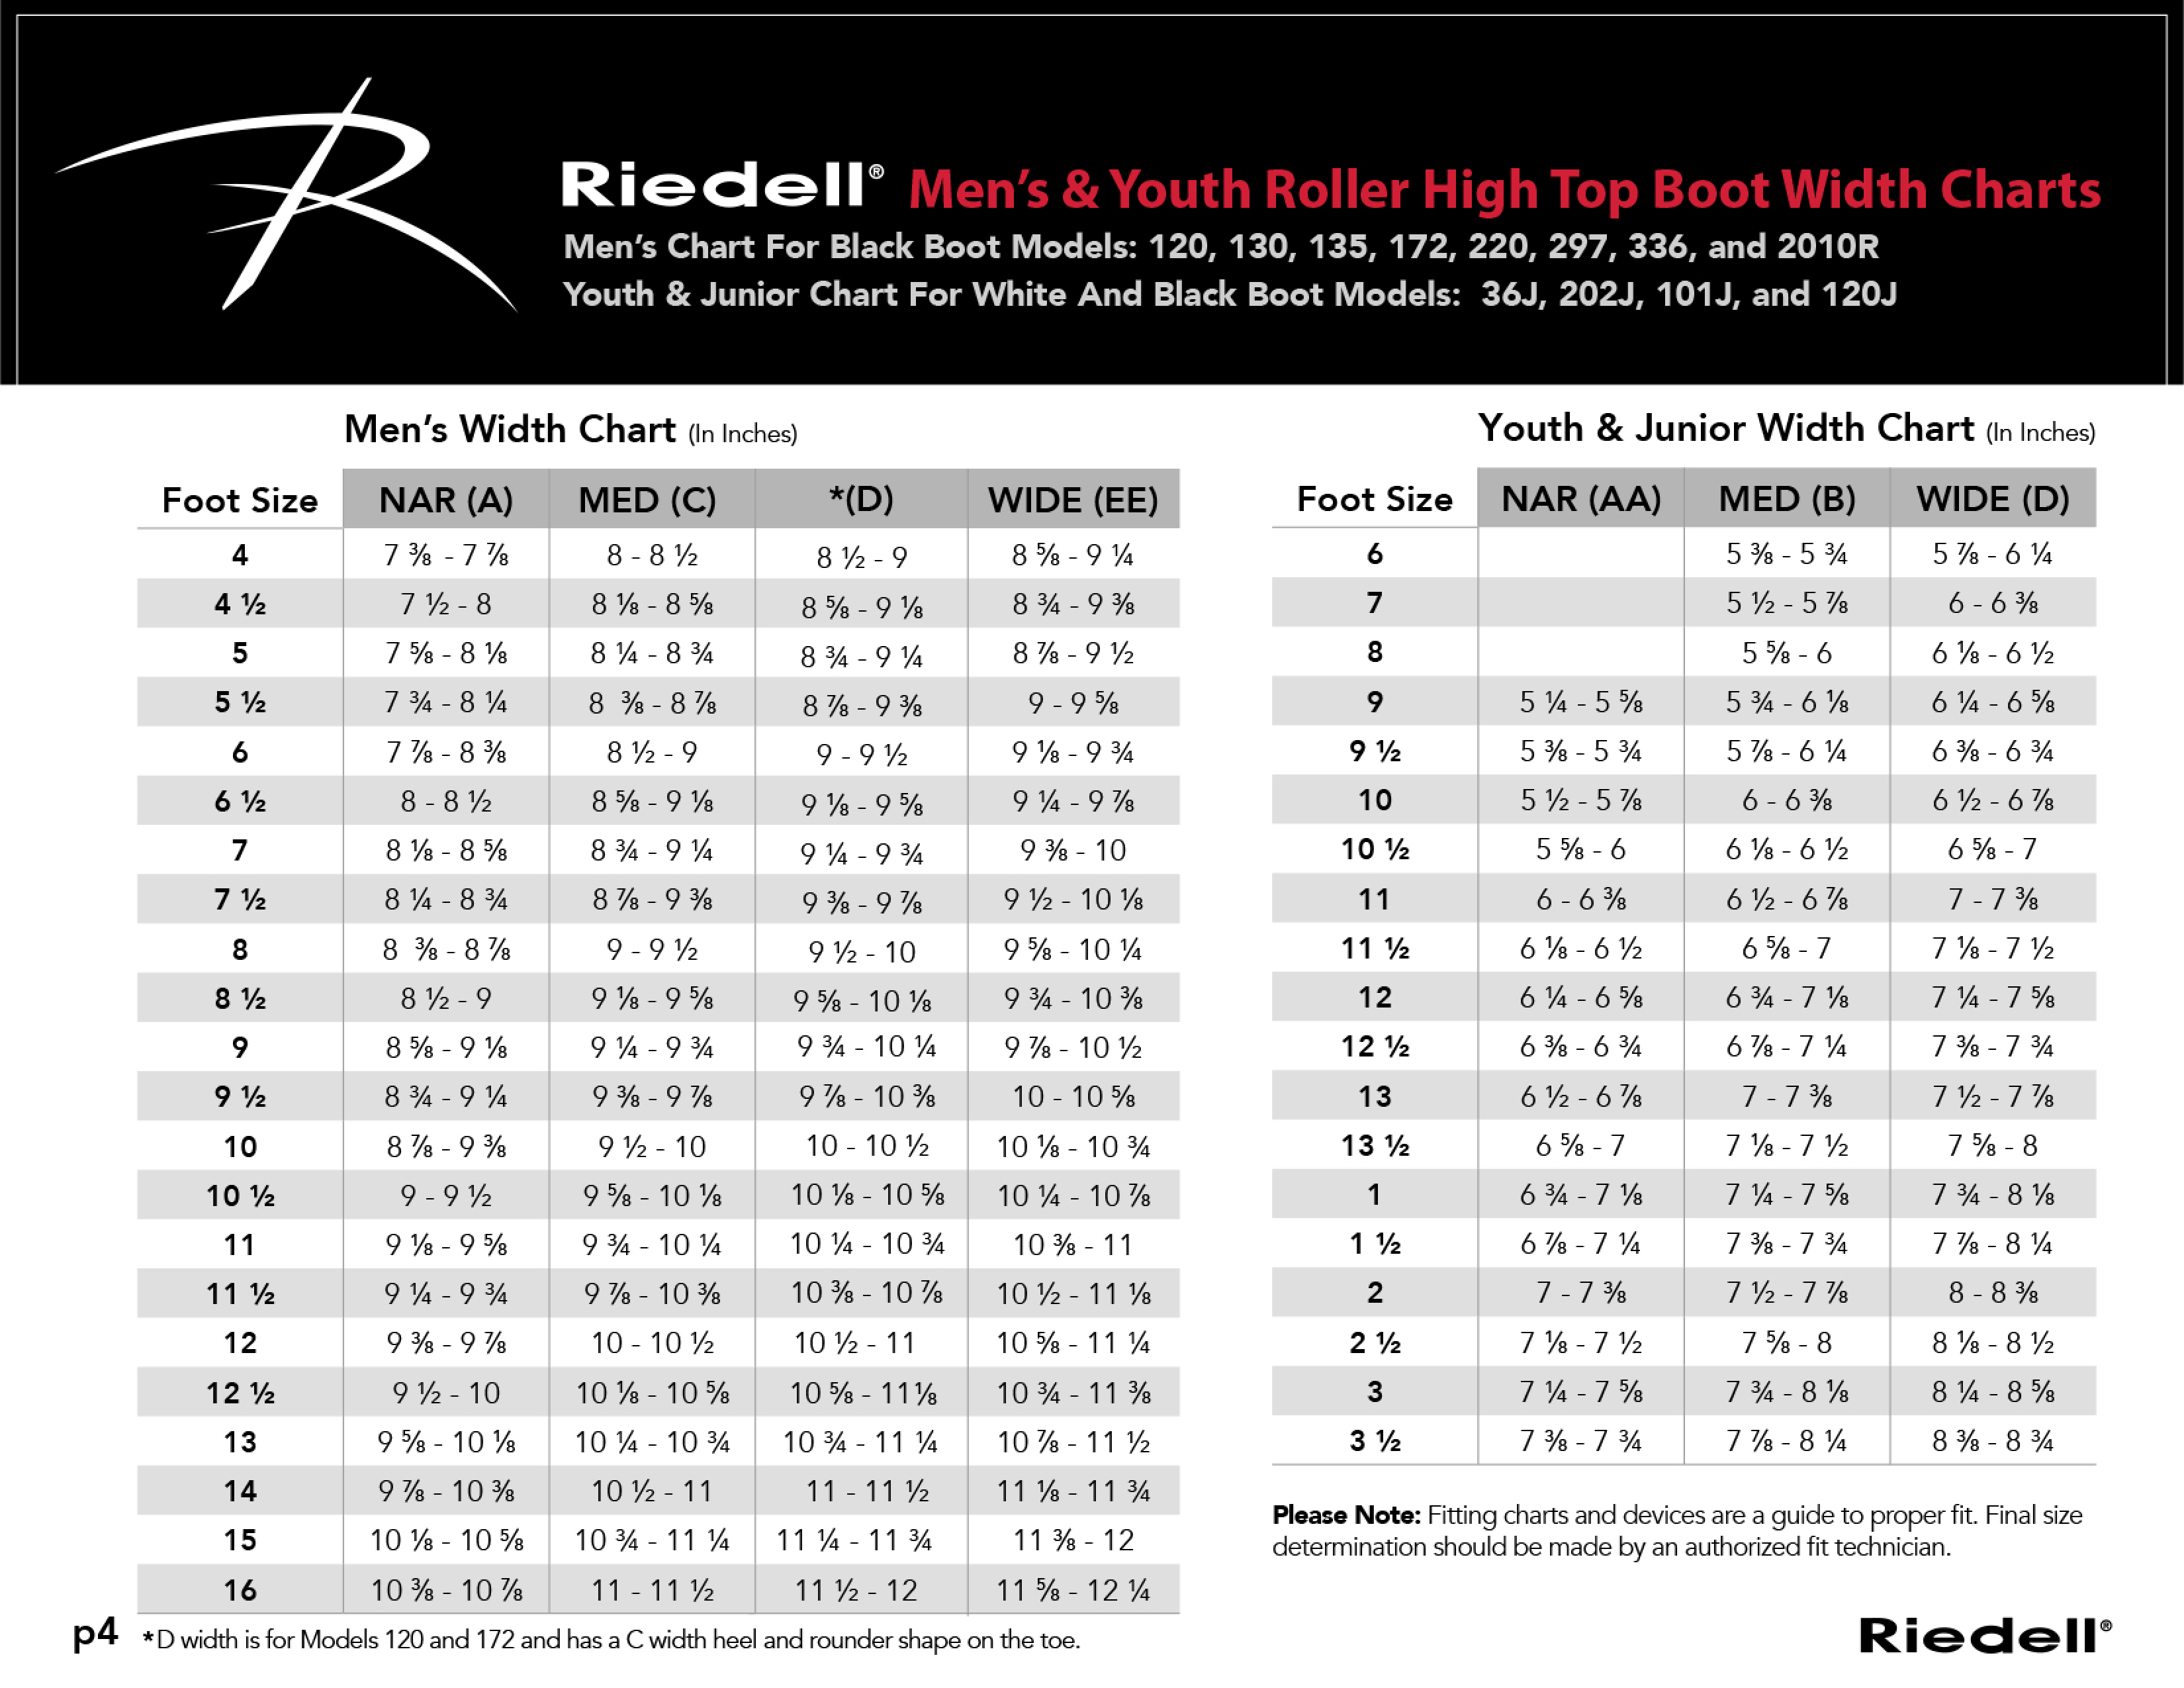 riedell-high-top-skates-sizing-chart